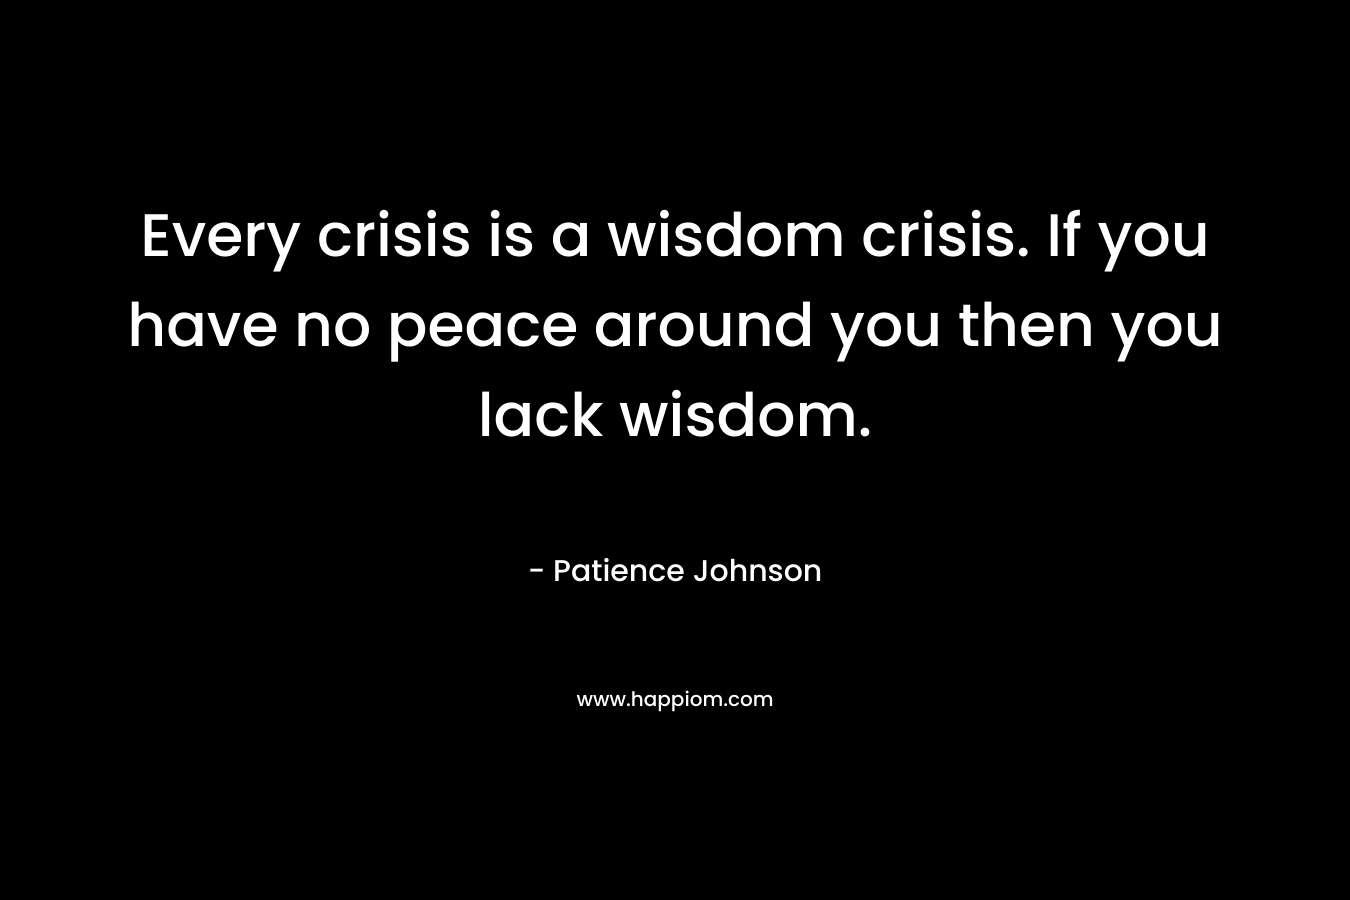 Every crisis is a wisdom crisis. If you have no peace around you then you lack wisdom. – Patience Johnson